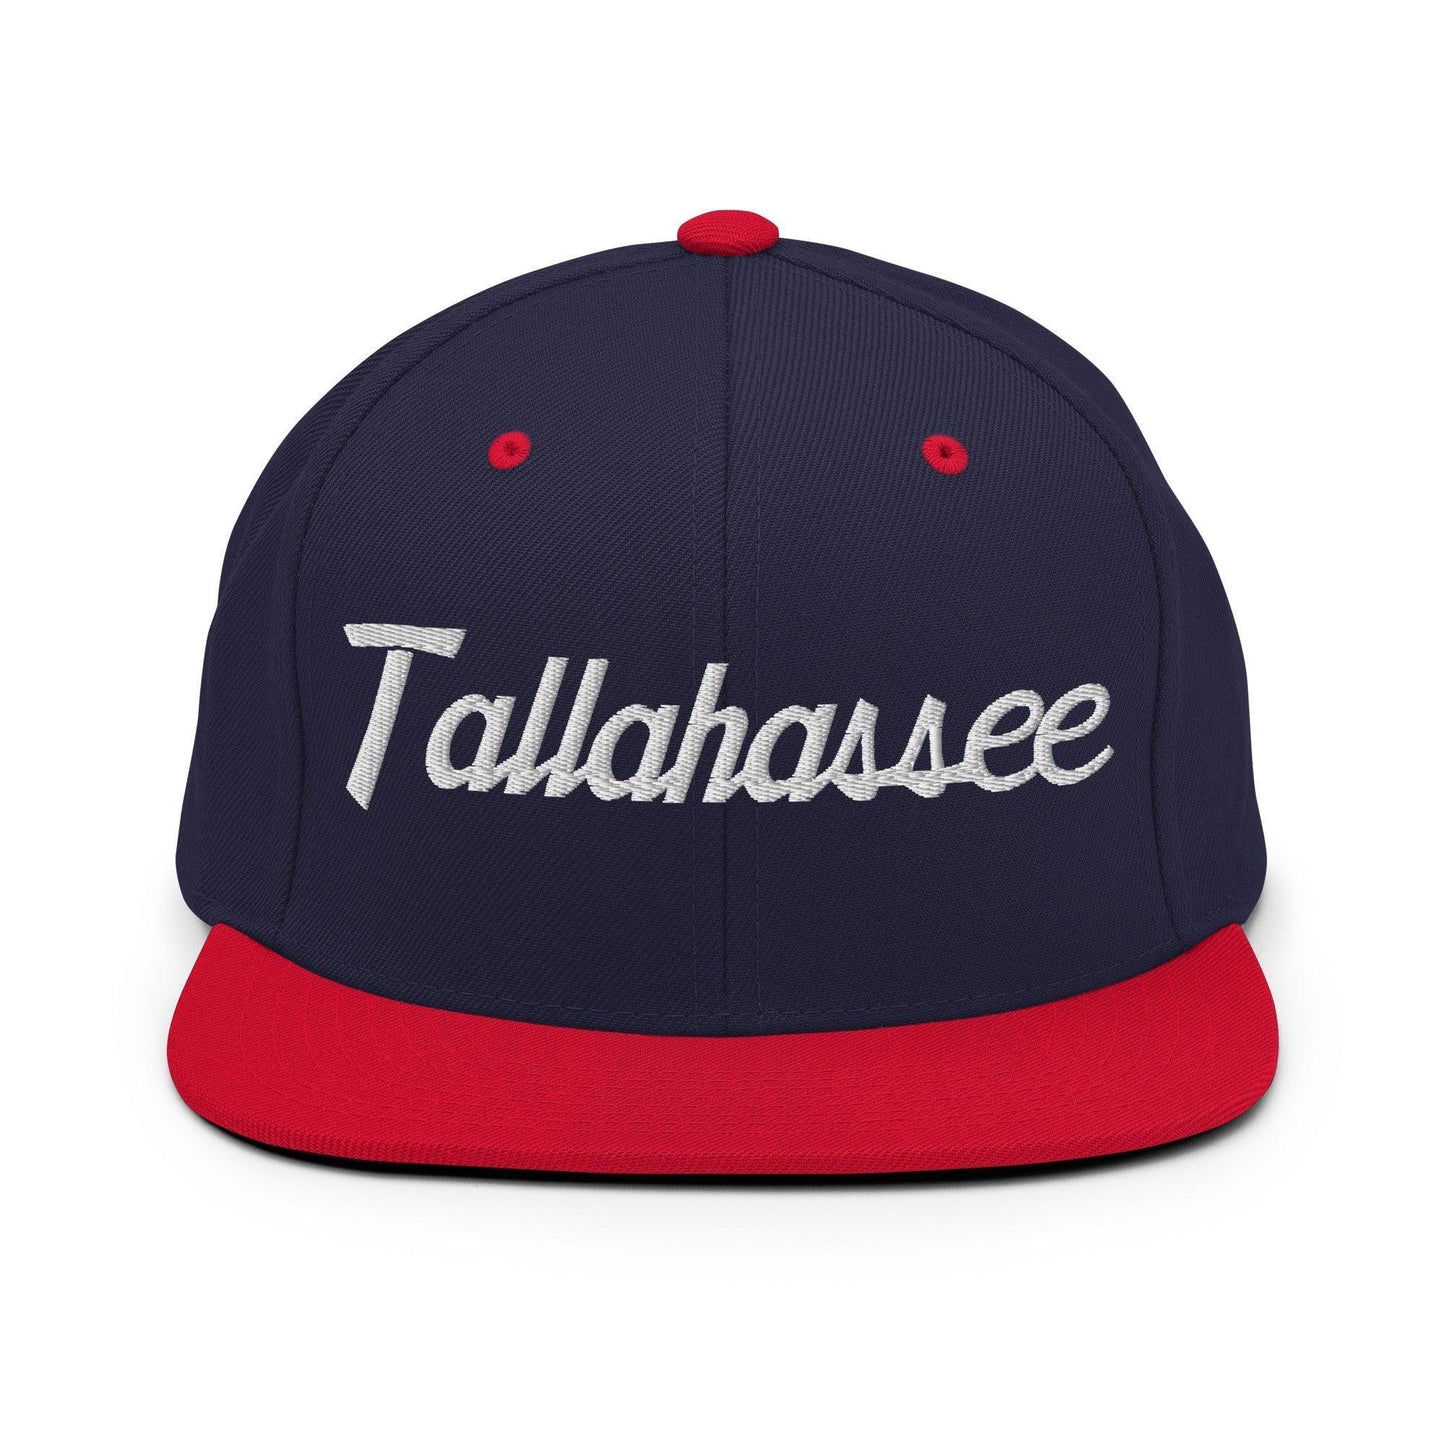 Tallahassee Script Snapback Hat Navy/ Red